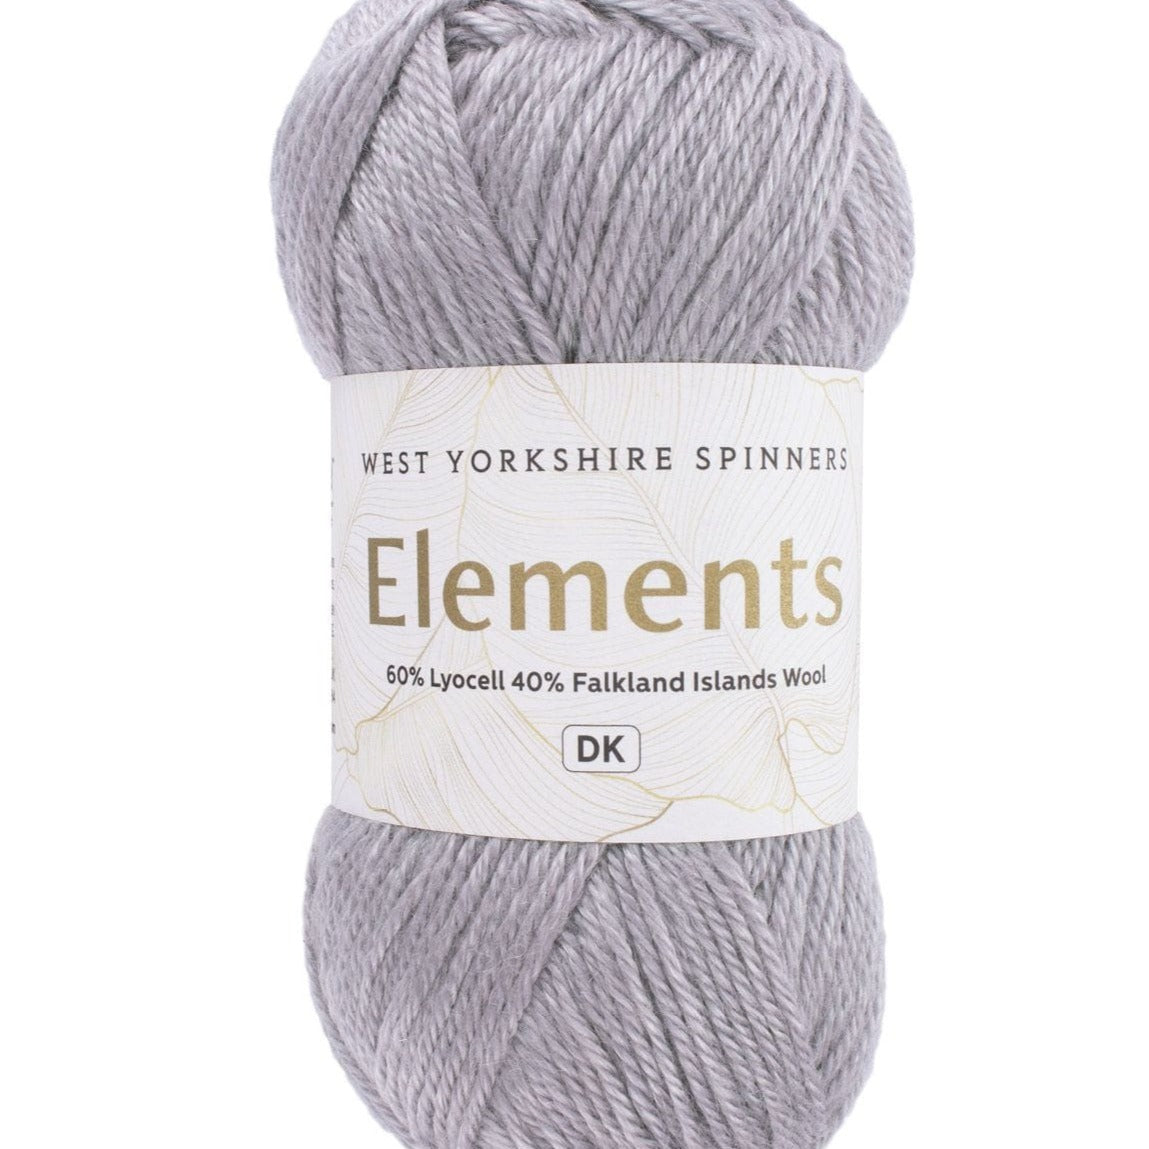 West Yorkshire Spinners Yarn Moonlight (1101) West Yorkshire Spinners Elements DK Yarn